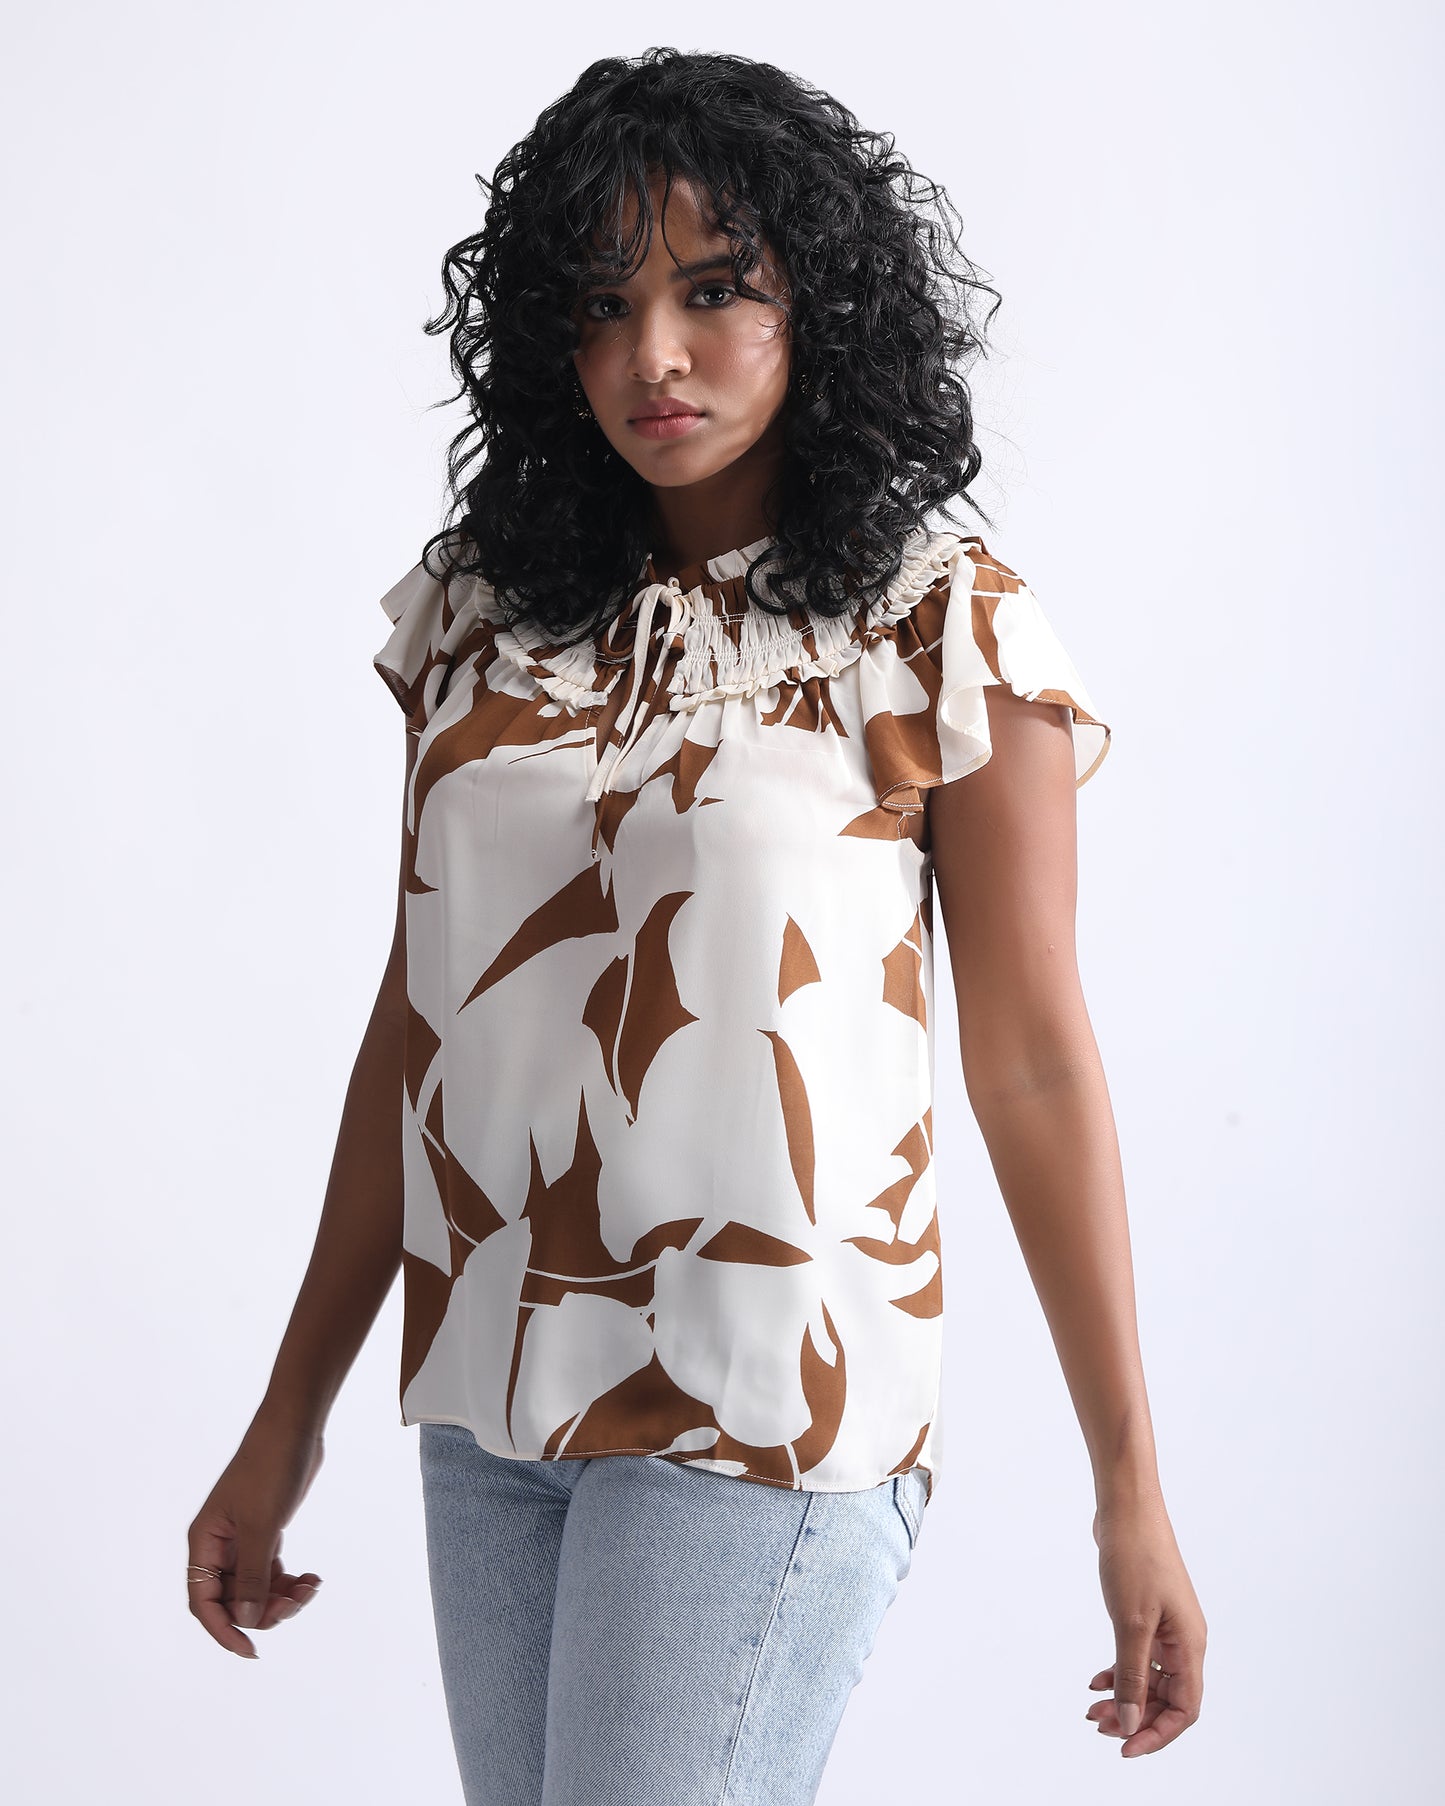 RUCHED NECK PRINTED TOP,a line, abstract, casual, cream, drawstring, floral, georgette, longline, mock neck, printed, regular fit, ruched, short sleeves, summer, tie knot, tops, topwear, woven,ruched-neck-printed-top-cream,Color- Cream
Fabric- Georgette
Type- A Line
Fit- Regular
Length- Longline
Neck- Mock Neck
Sleeves- Short Sleeves
Closure- Drawstring
Print- Abstract Floral Print
Details- Ruched Neck